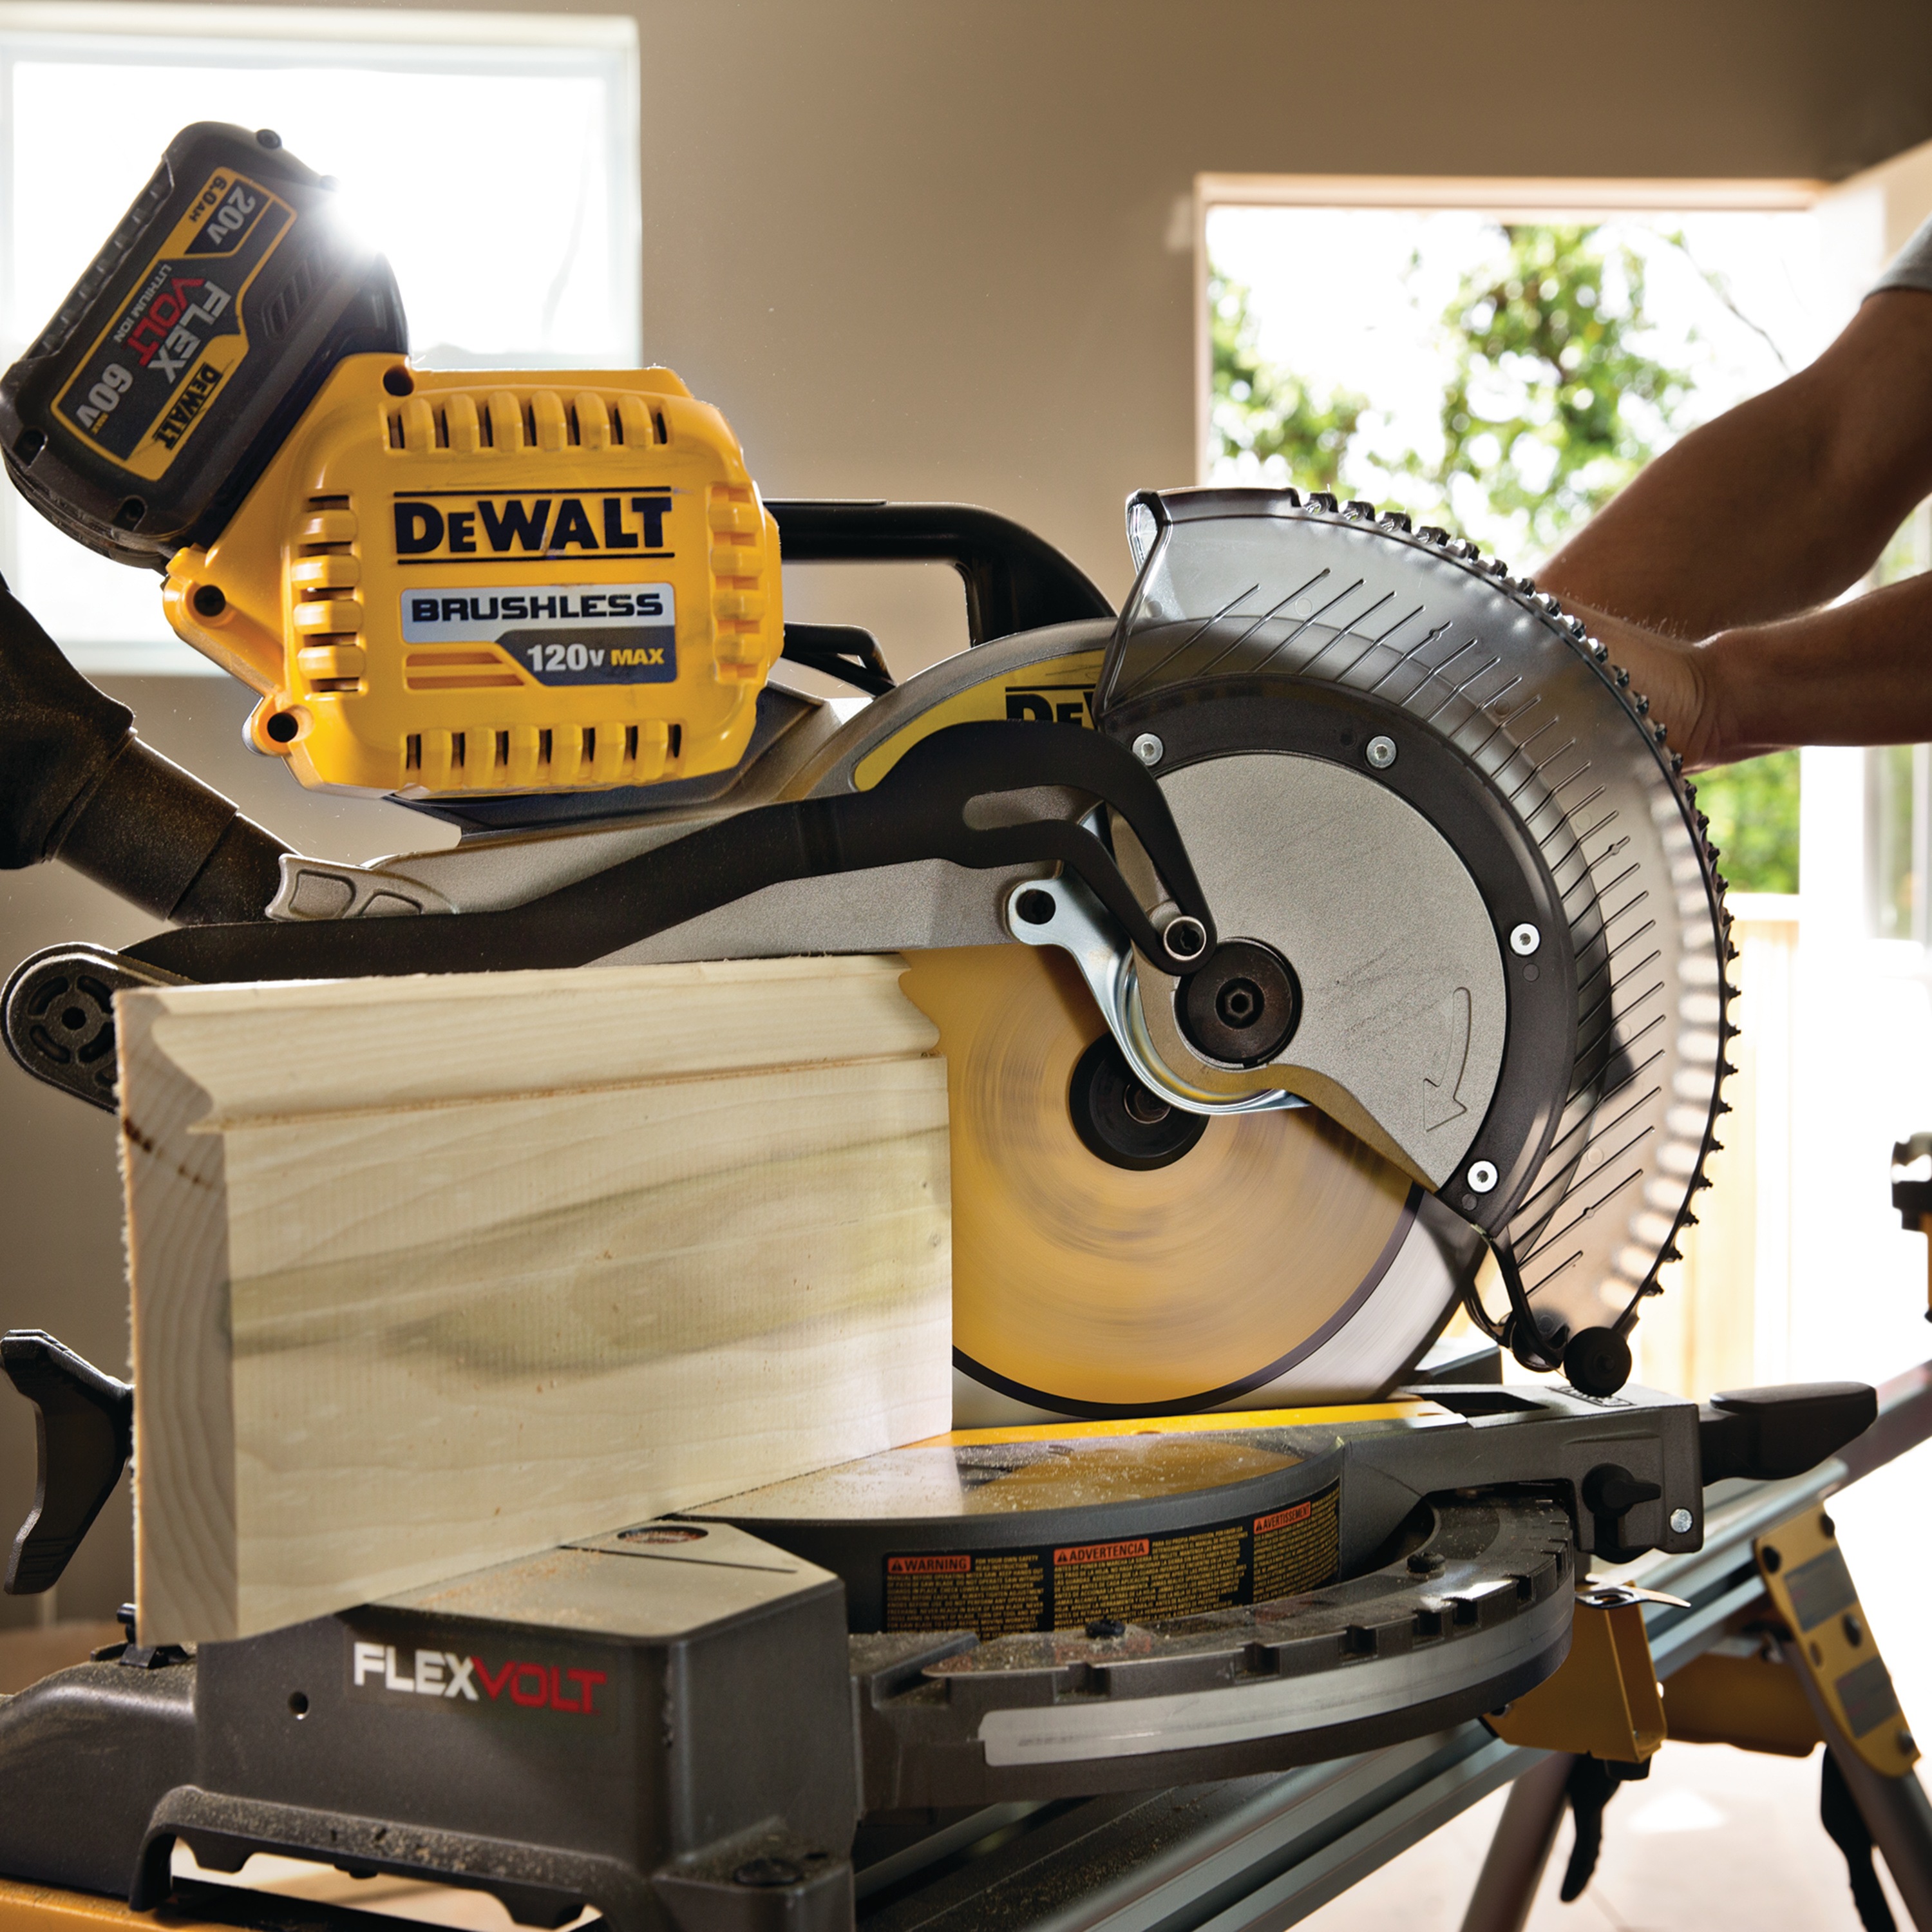 Miter saw blade in action.